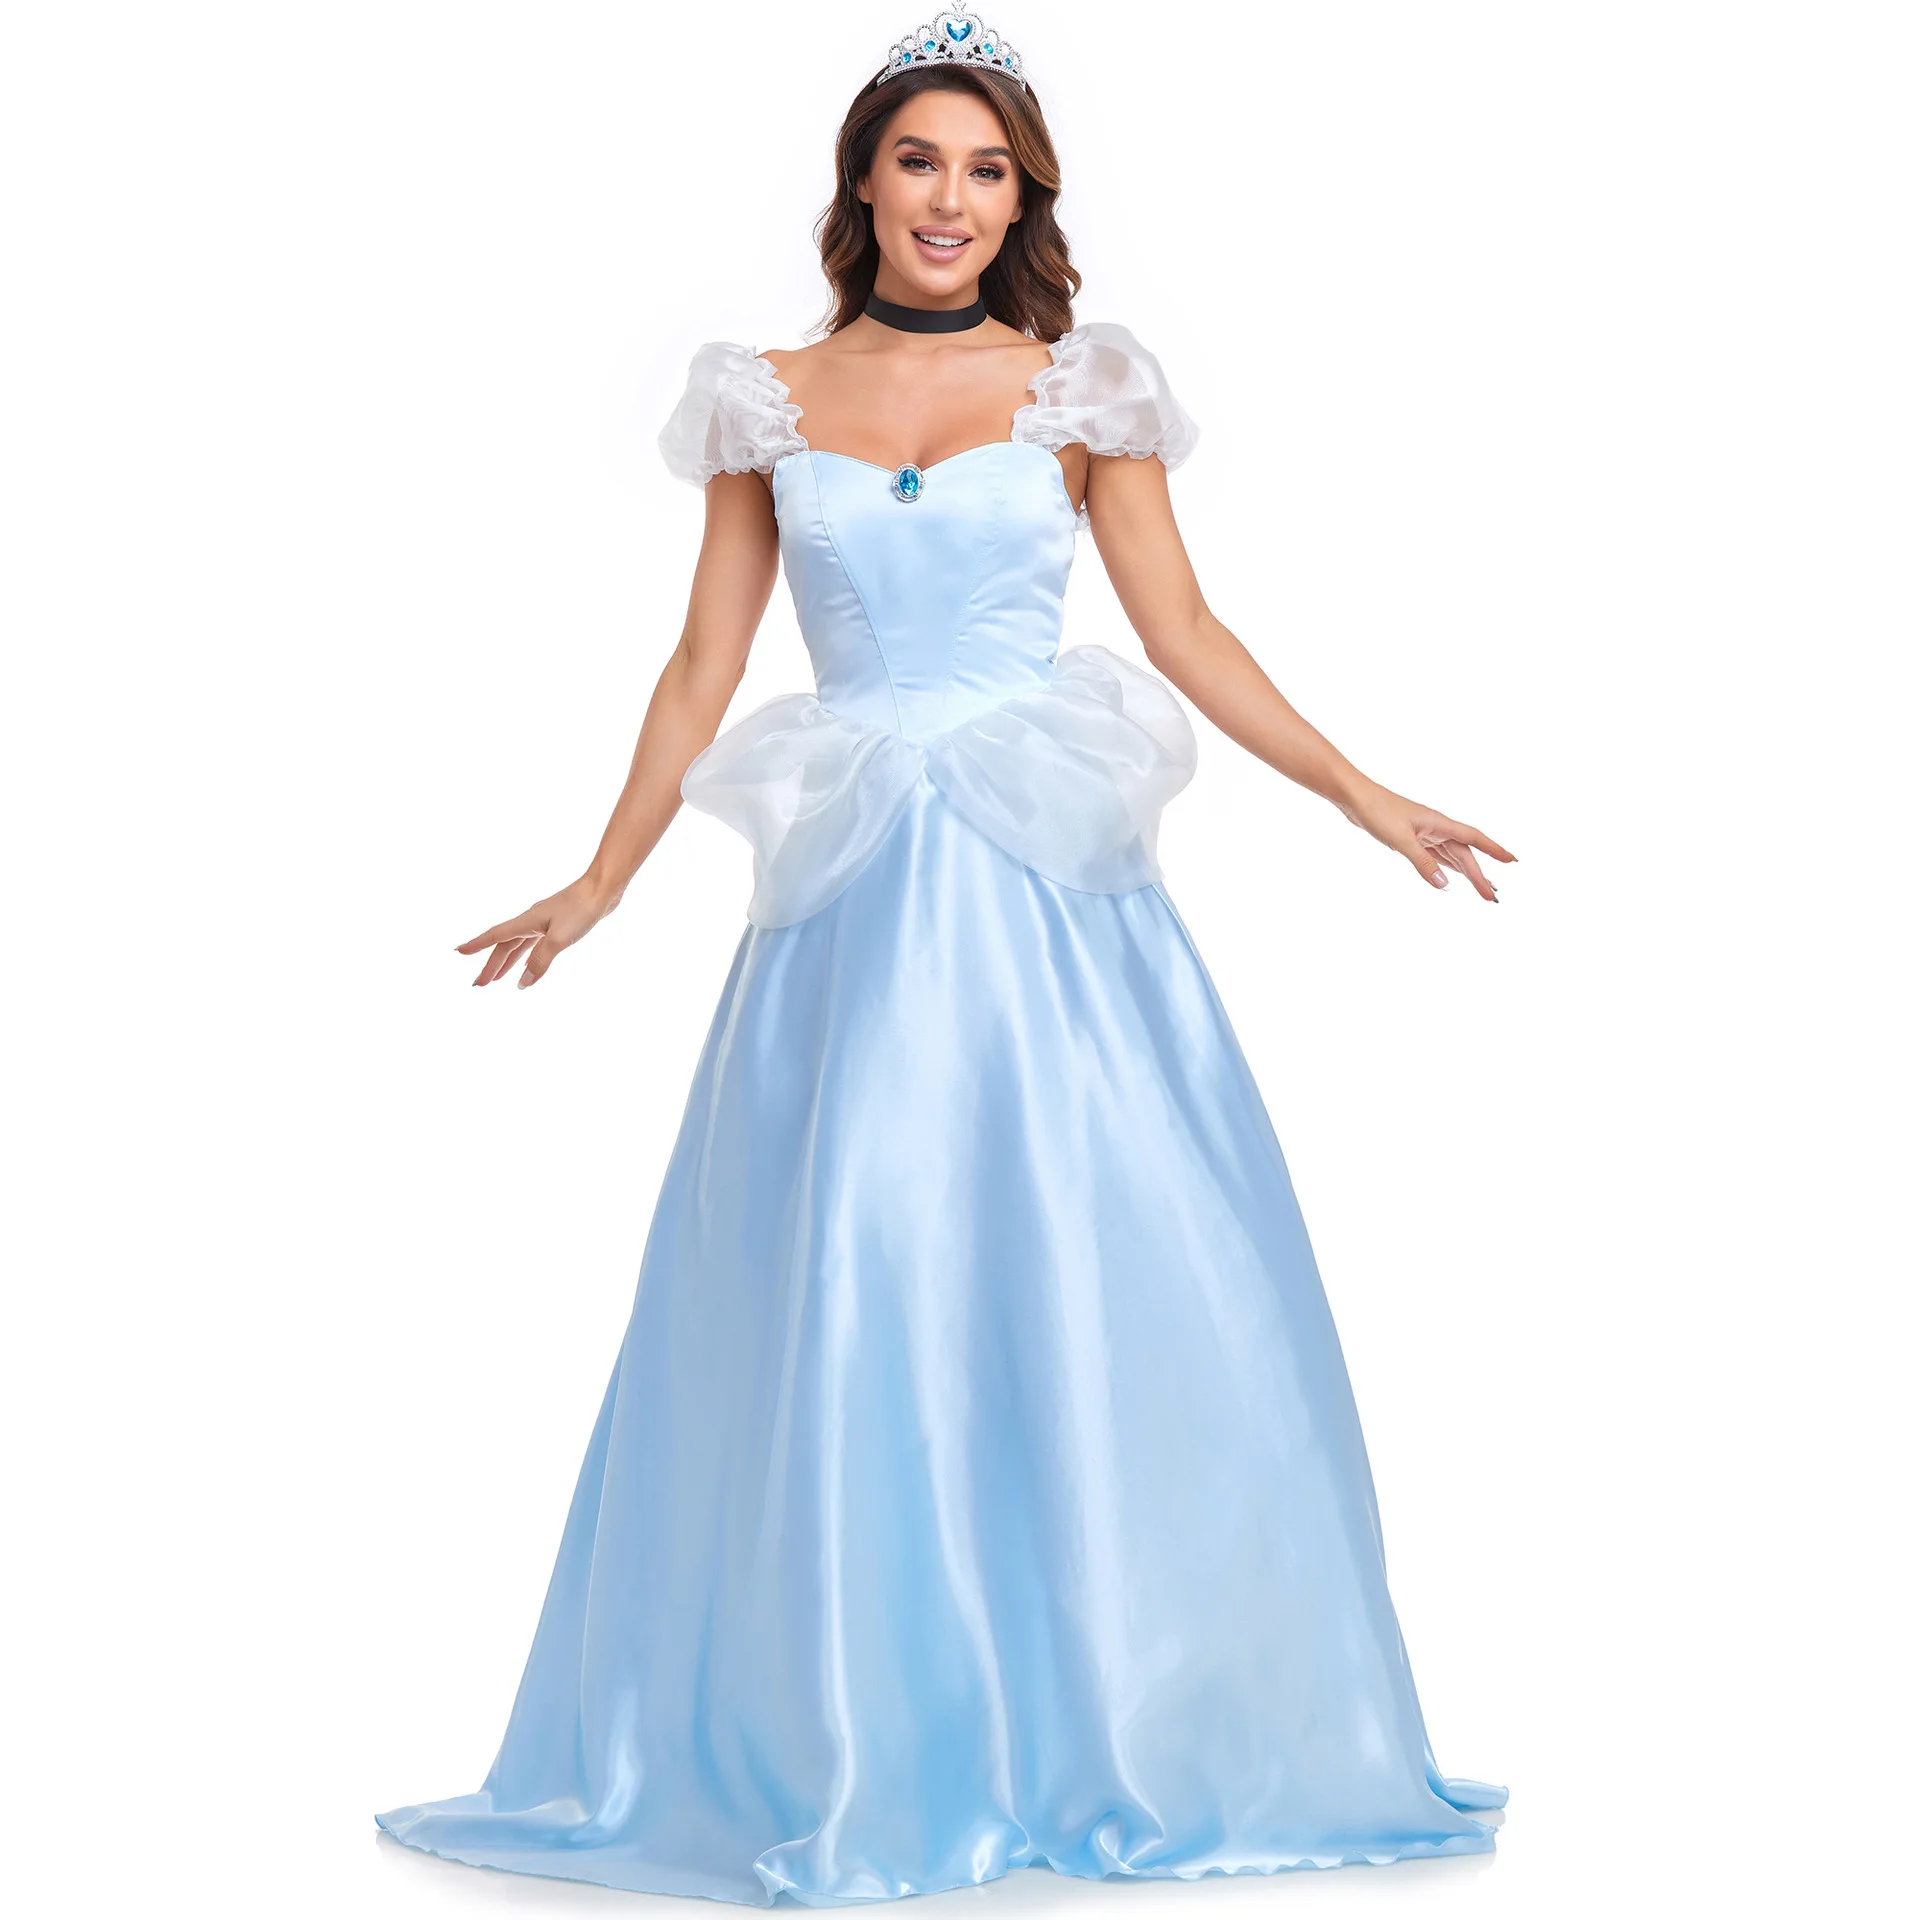 

Deluxe Adult Cinderella Costume For Halloween Carnival Women Fancy Dress Ball Gown Snow White Princess Costume Role Play Dress